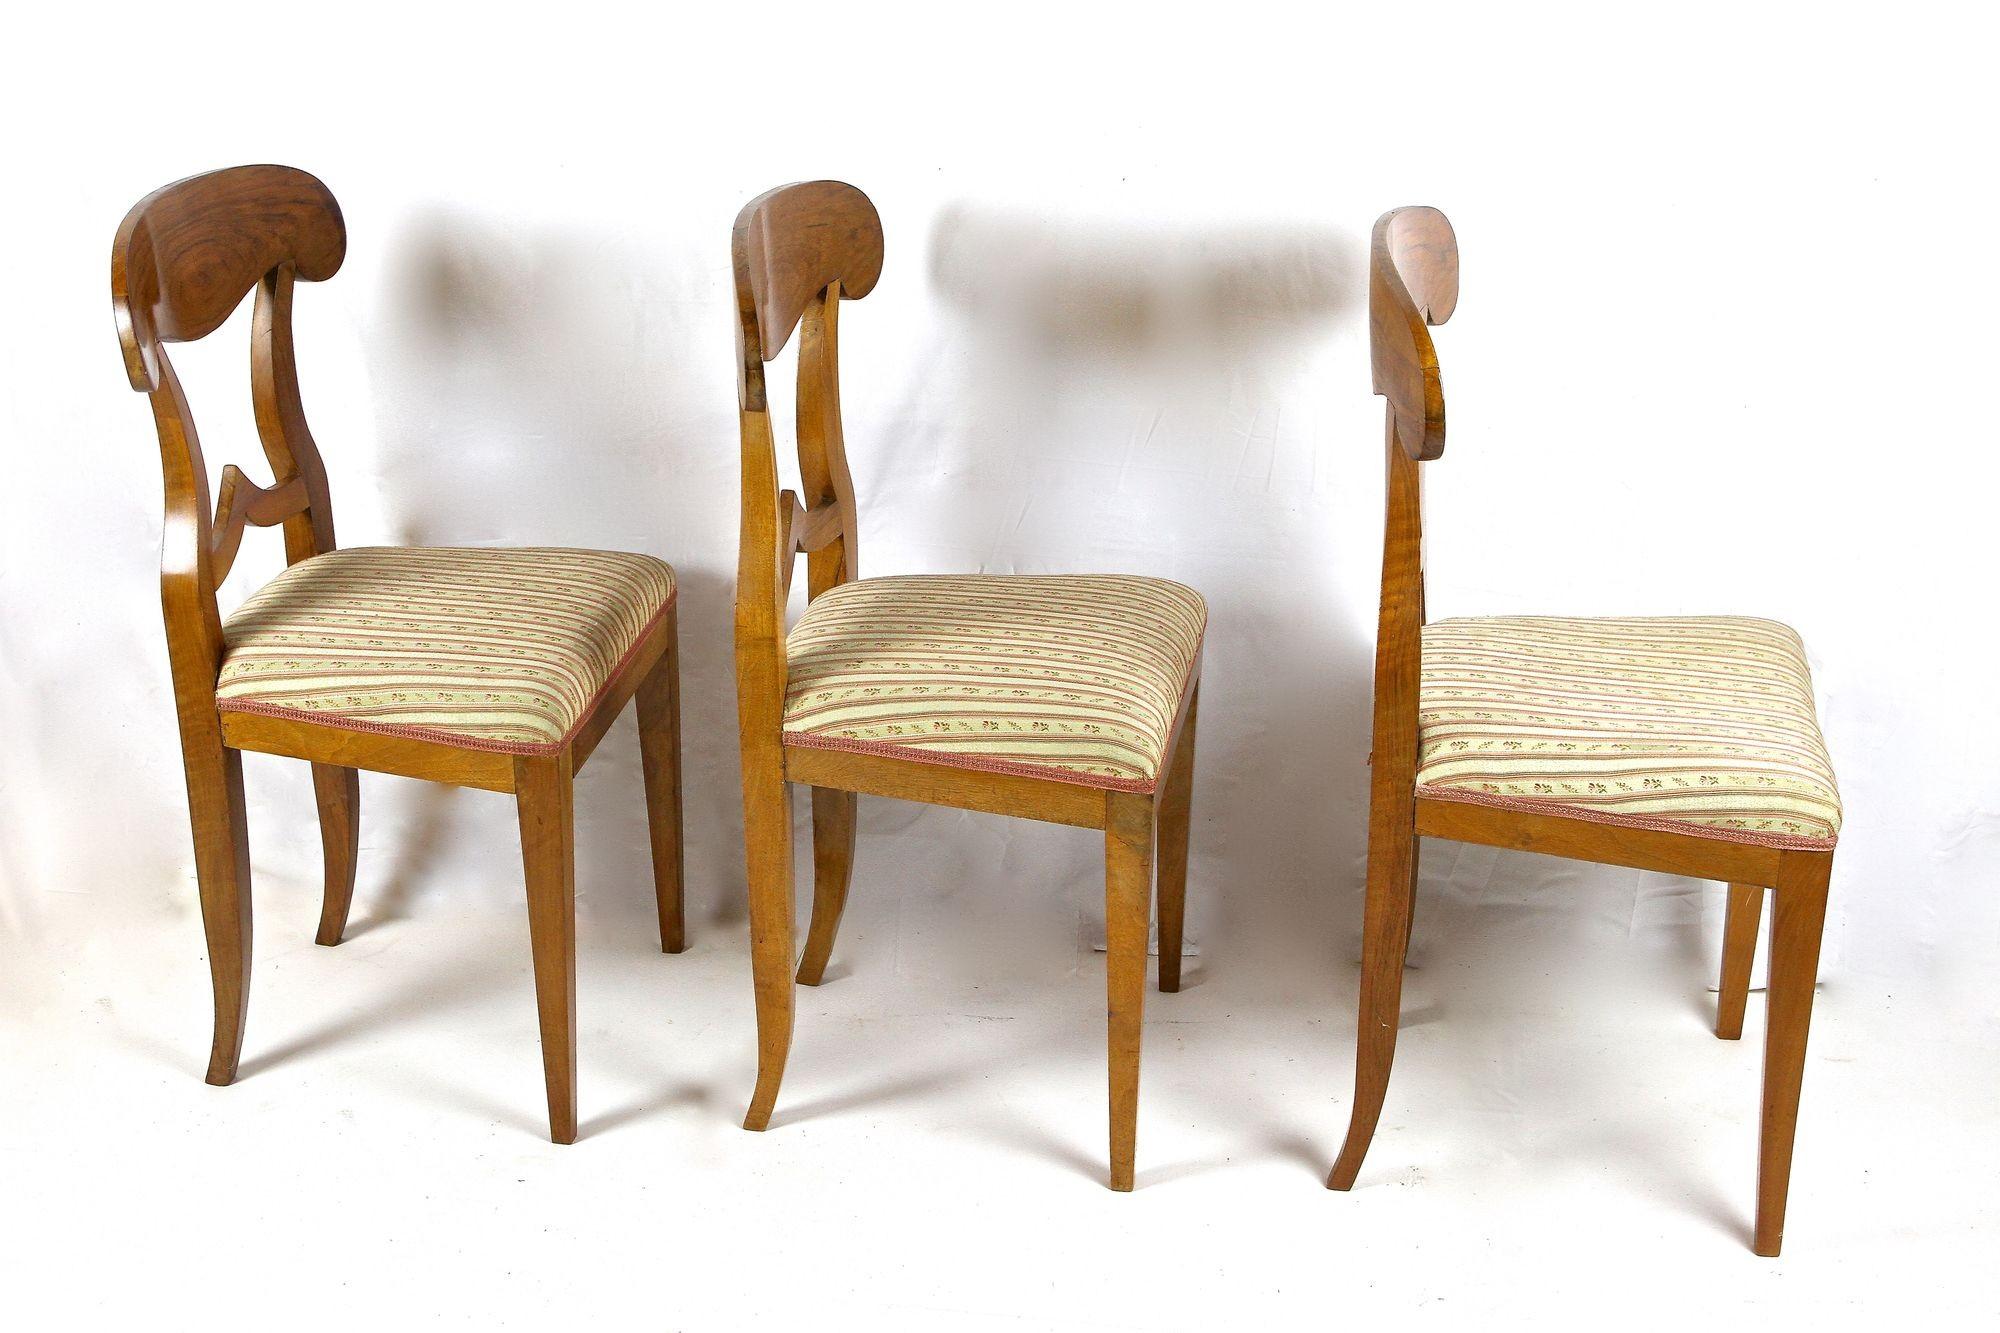 Set Of 6 Biedermeier Nutwood Shovel Dining Chairs, 19th Century, AT ca. 1830 For Sale 5